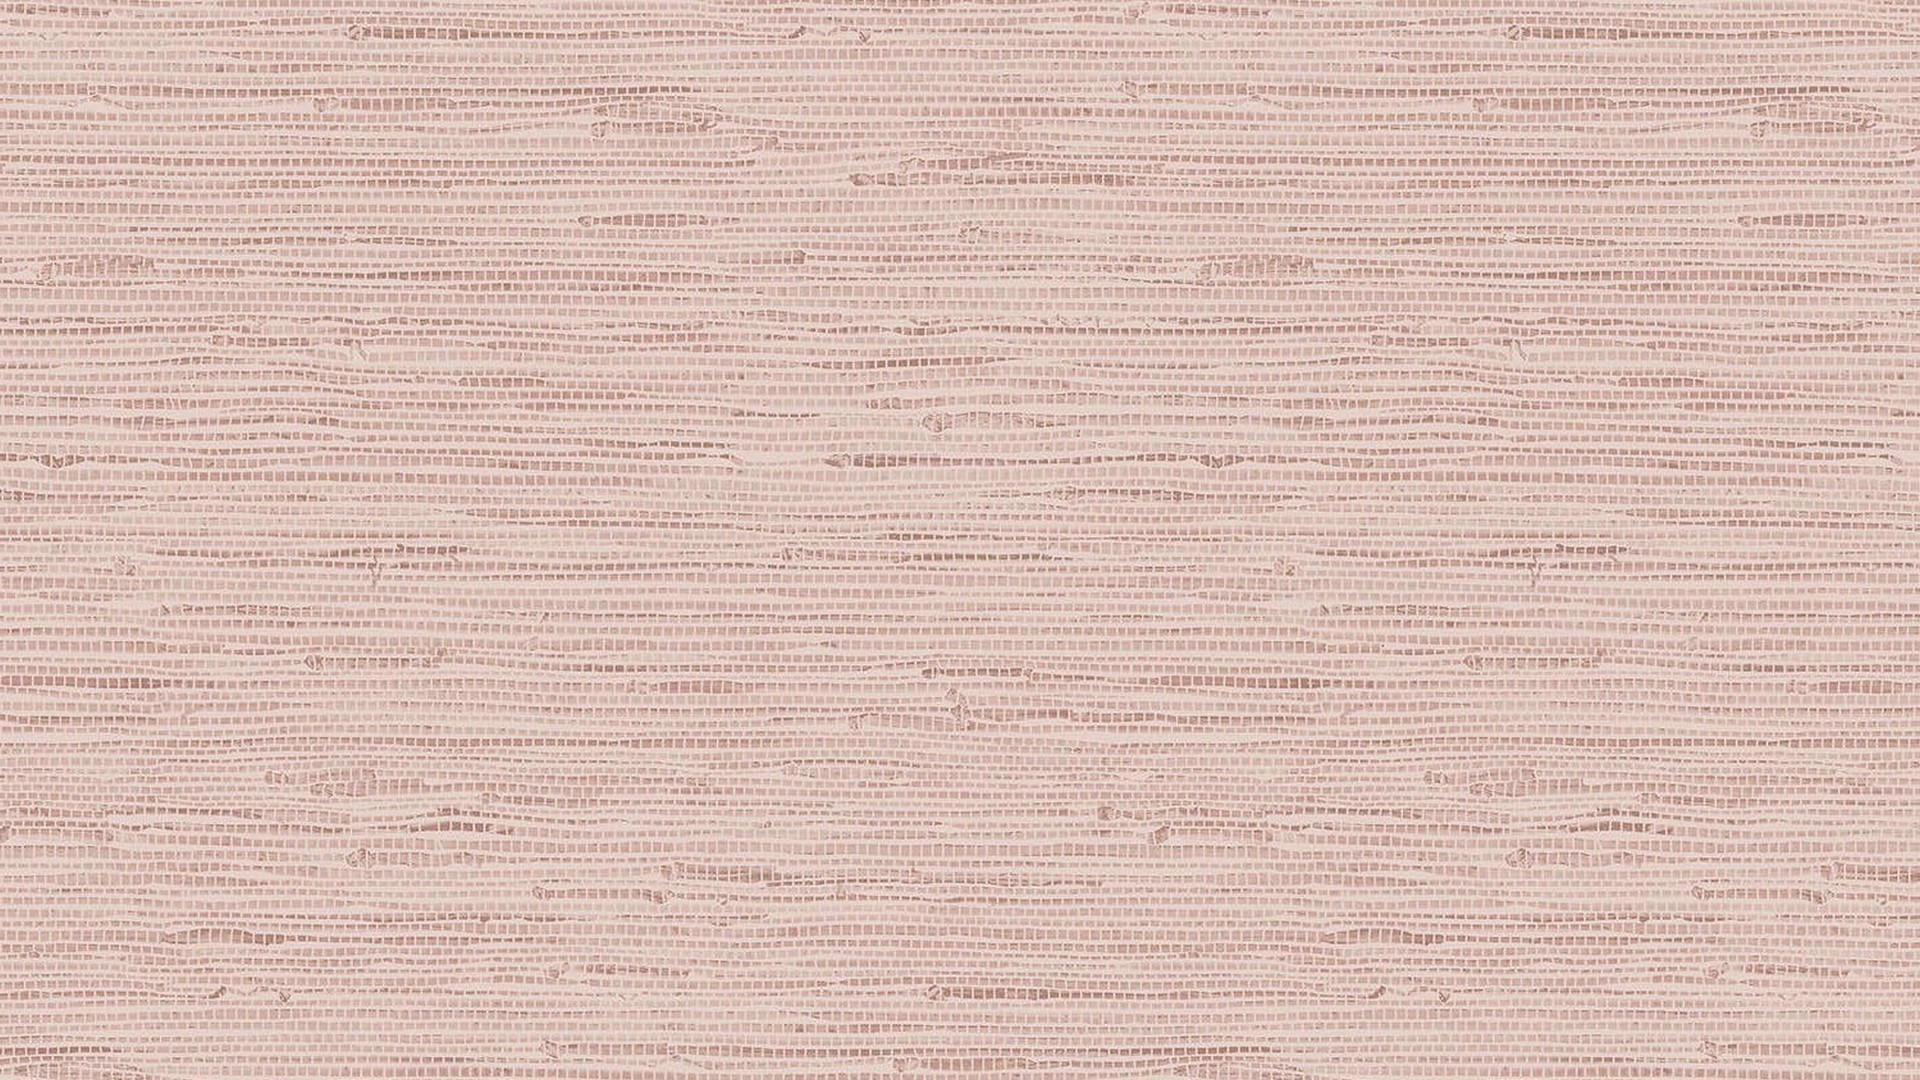 Rose Gold Desktop Backgrounds With Resolution 1920X1080